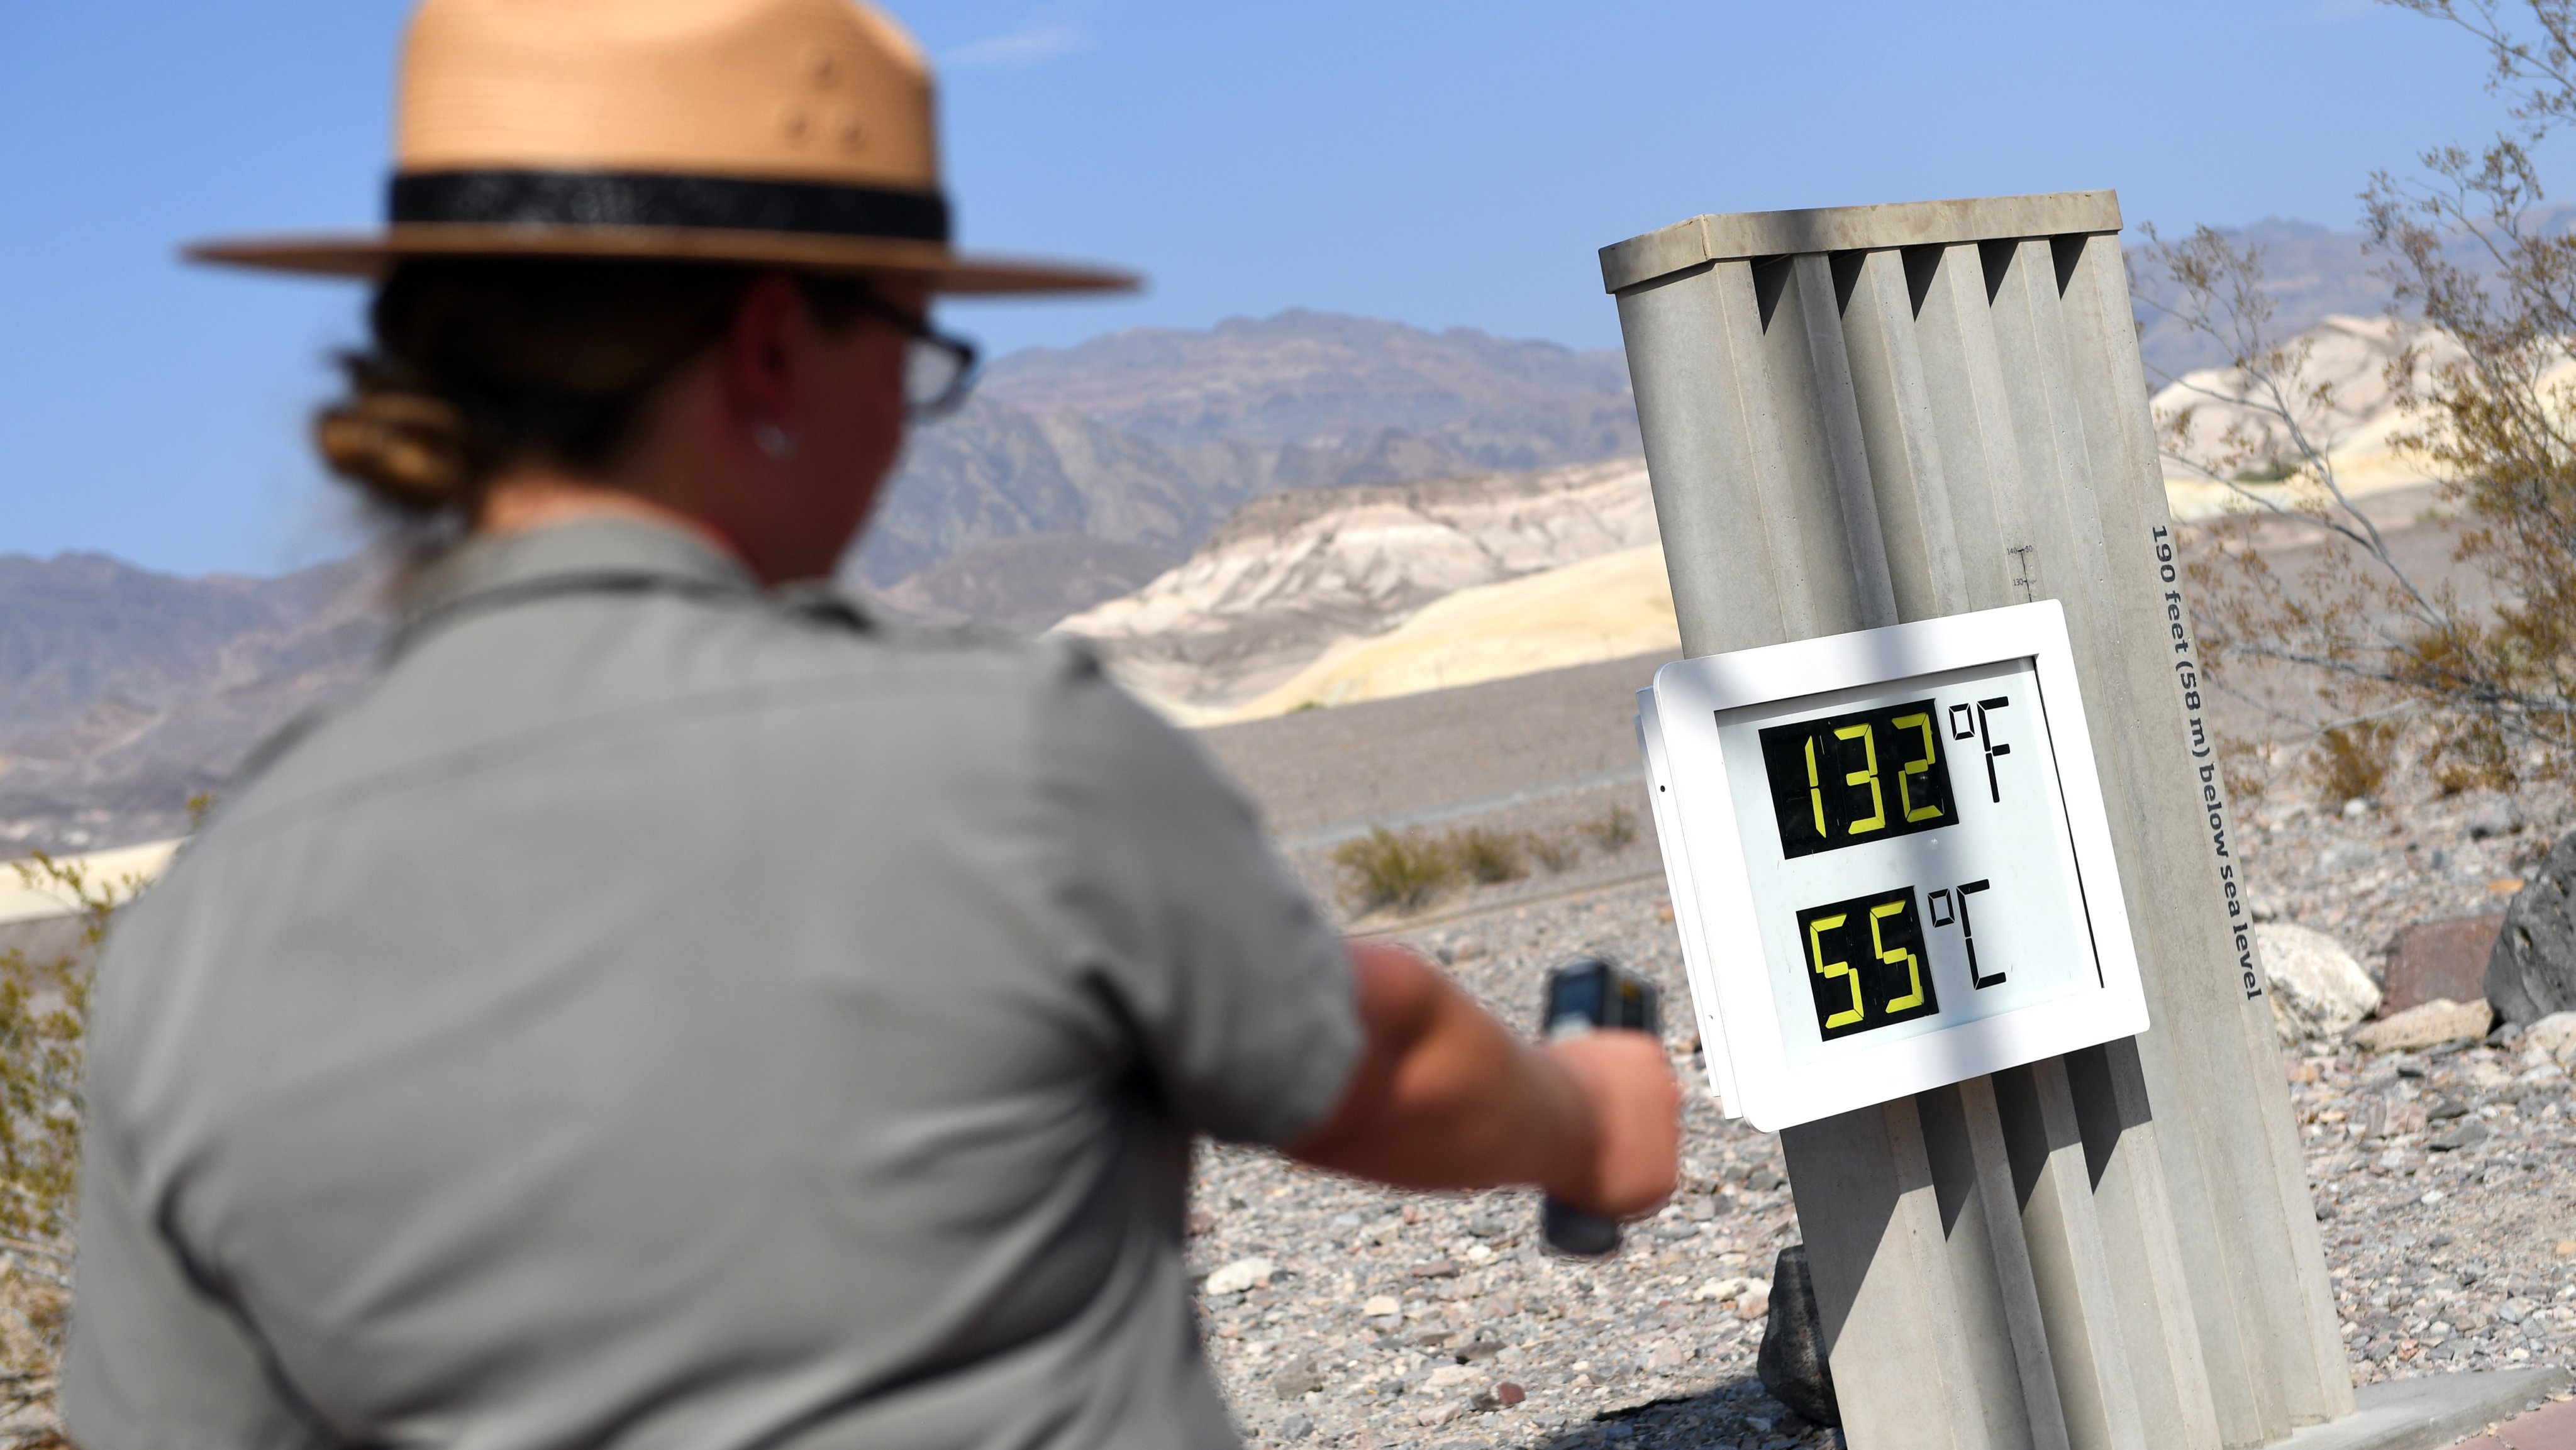 Extreme Heat Settles Over California